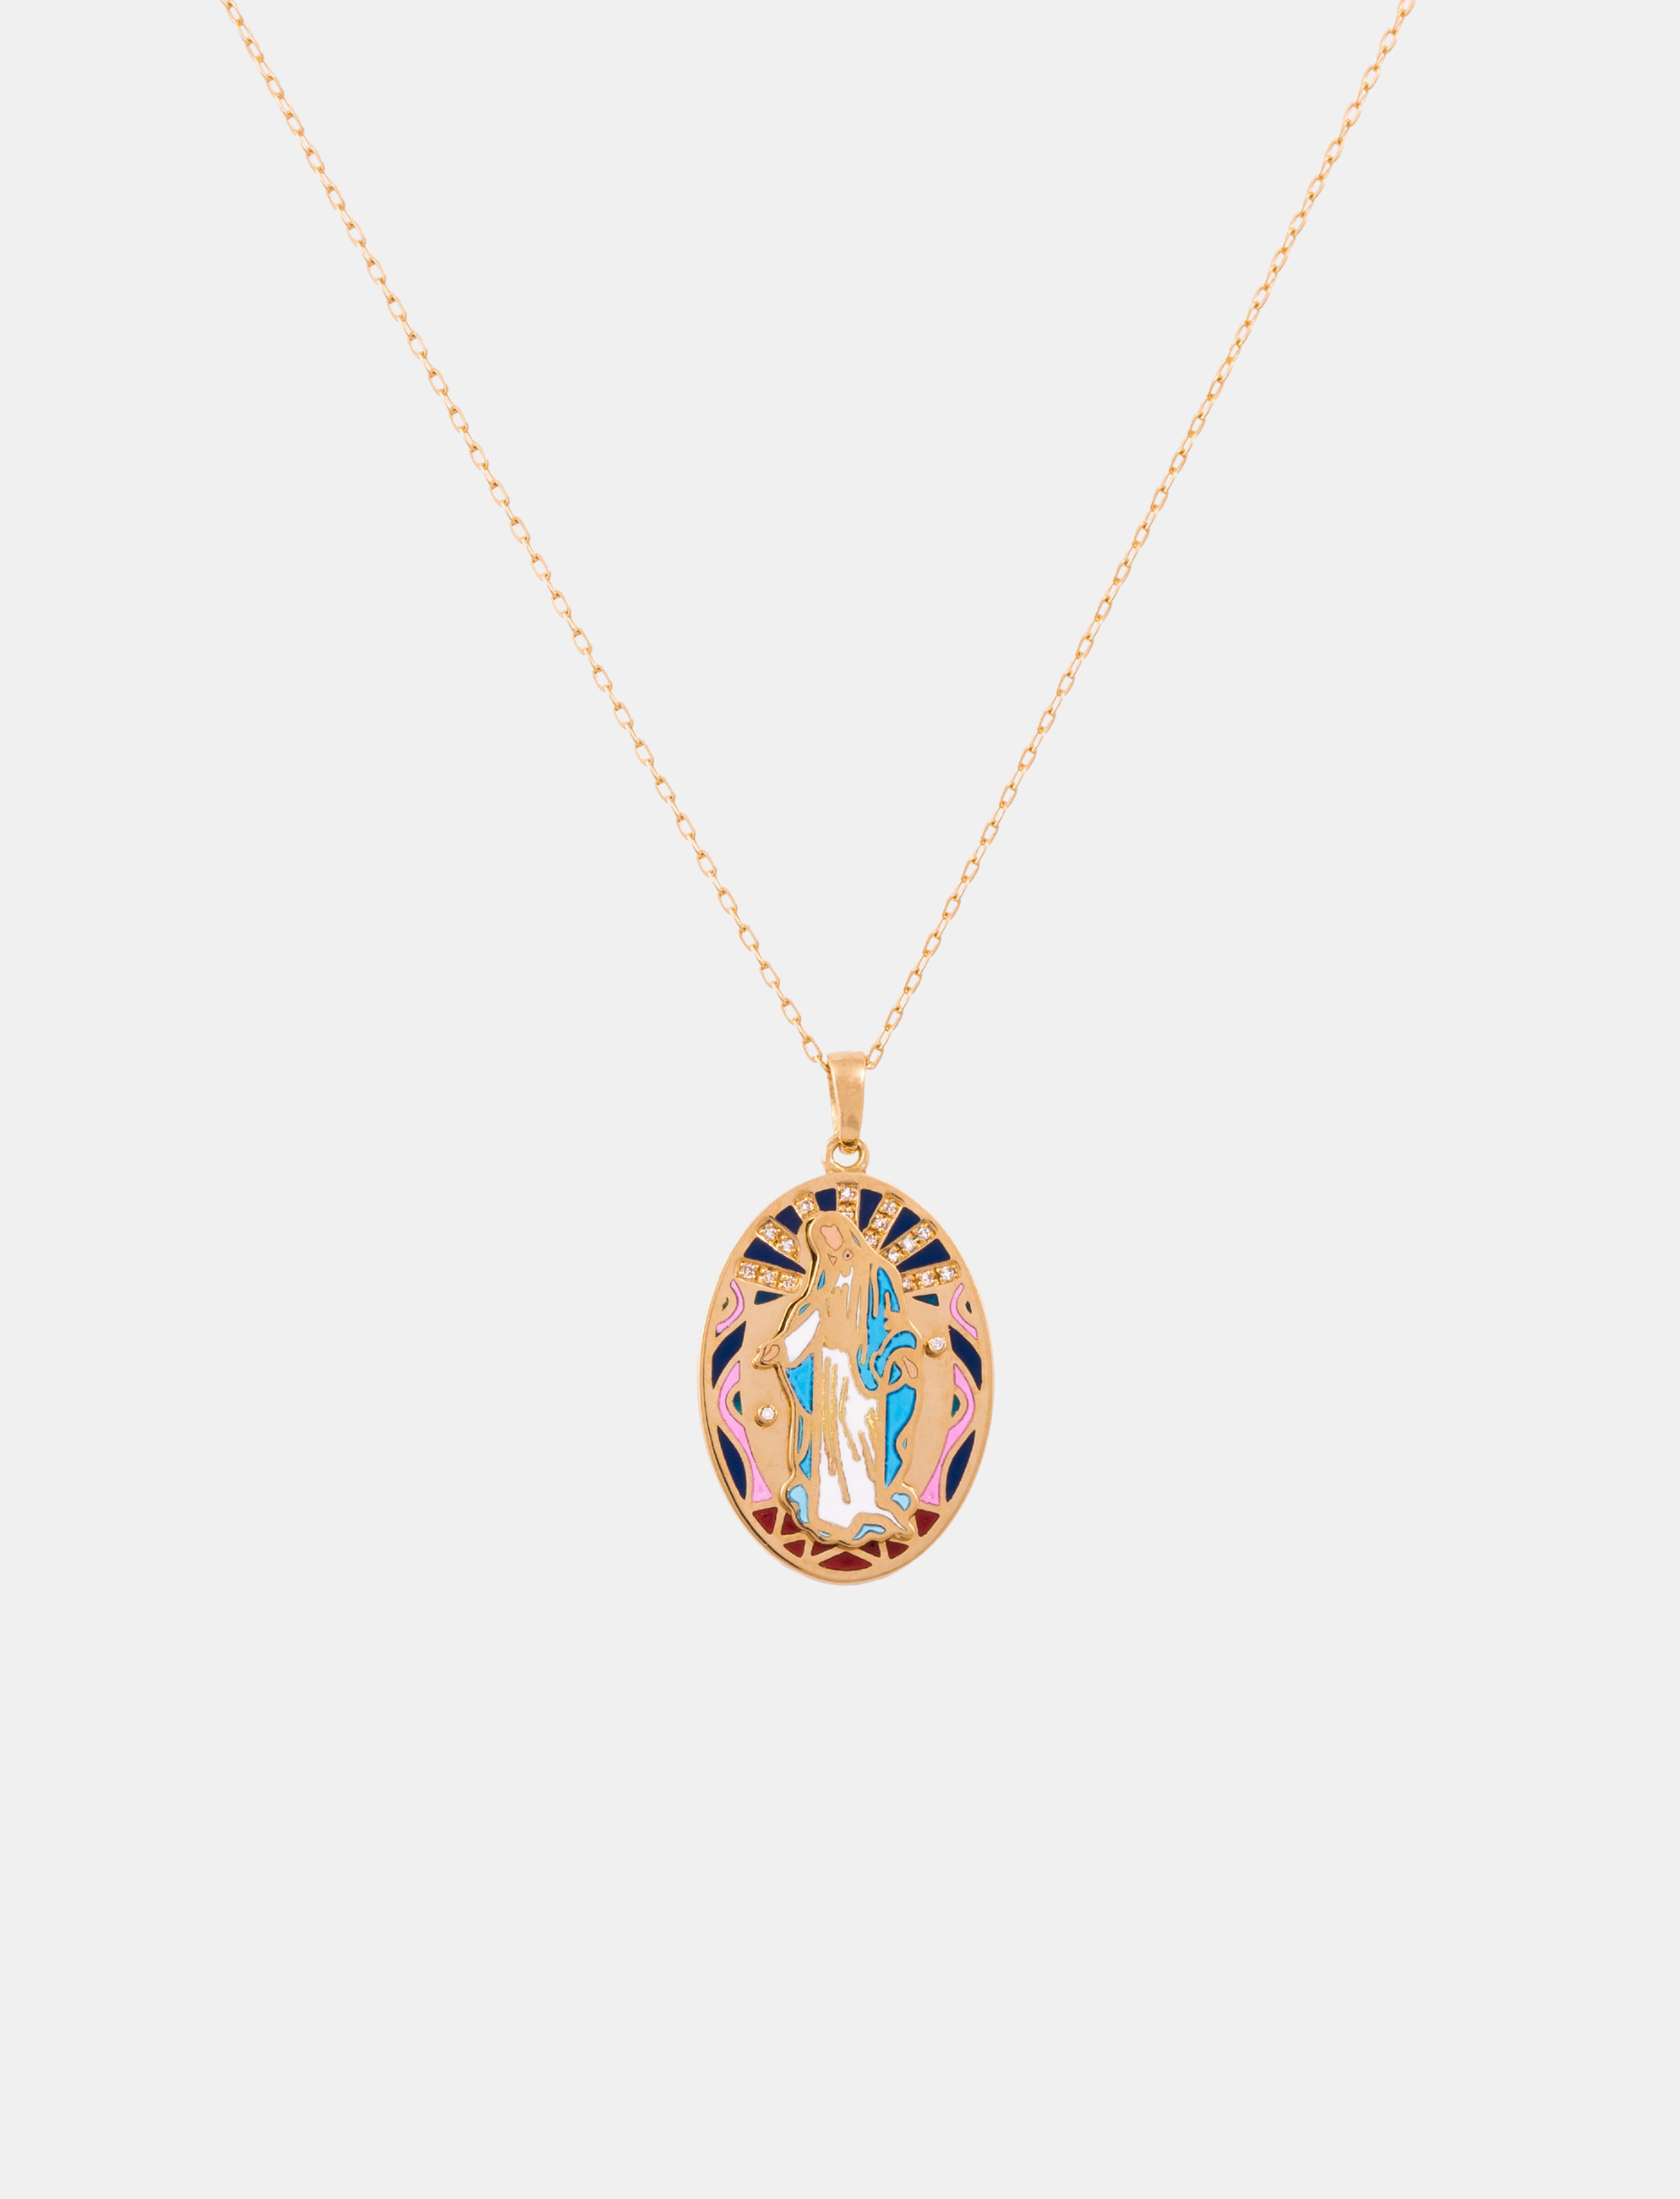 Celestial Mary Necklace